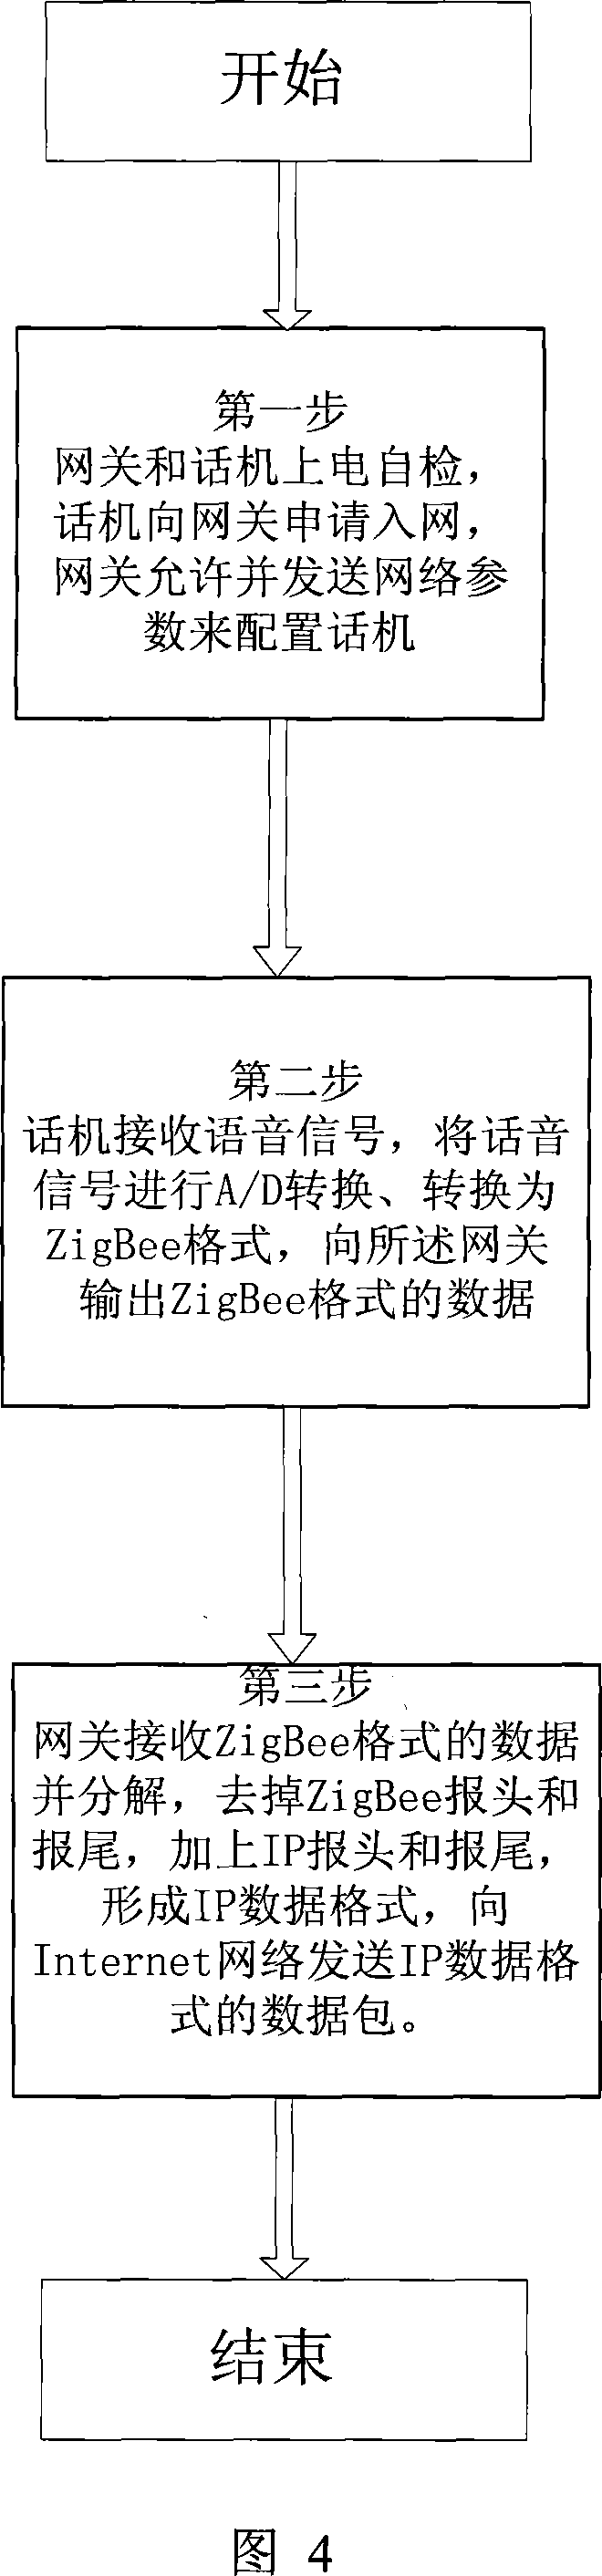 Method and system for implementing wireless IP telephone using ZigBee